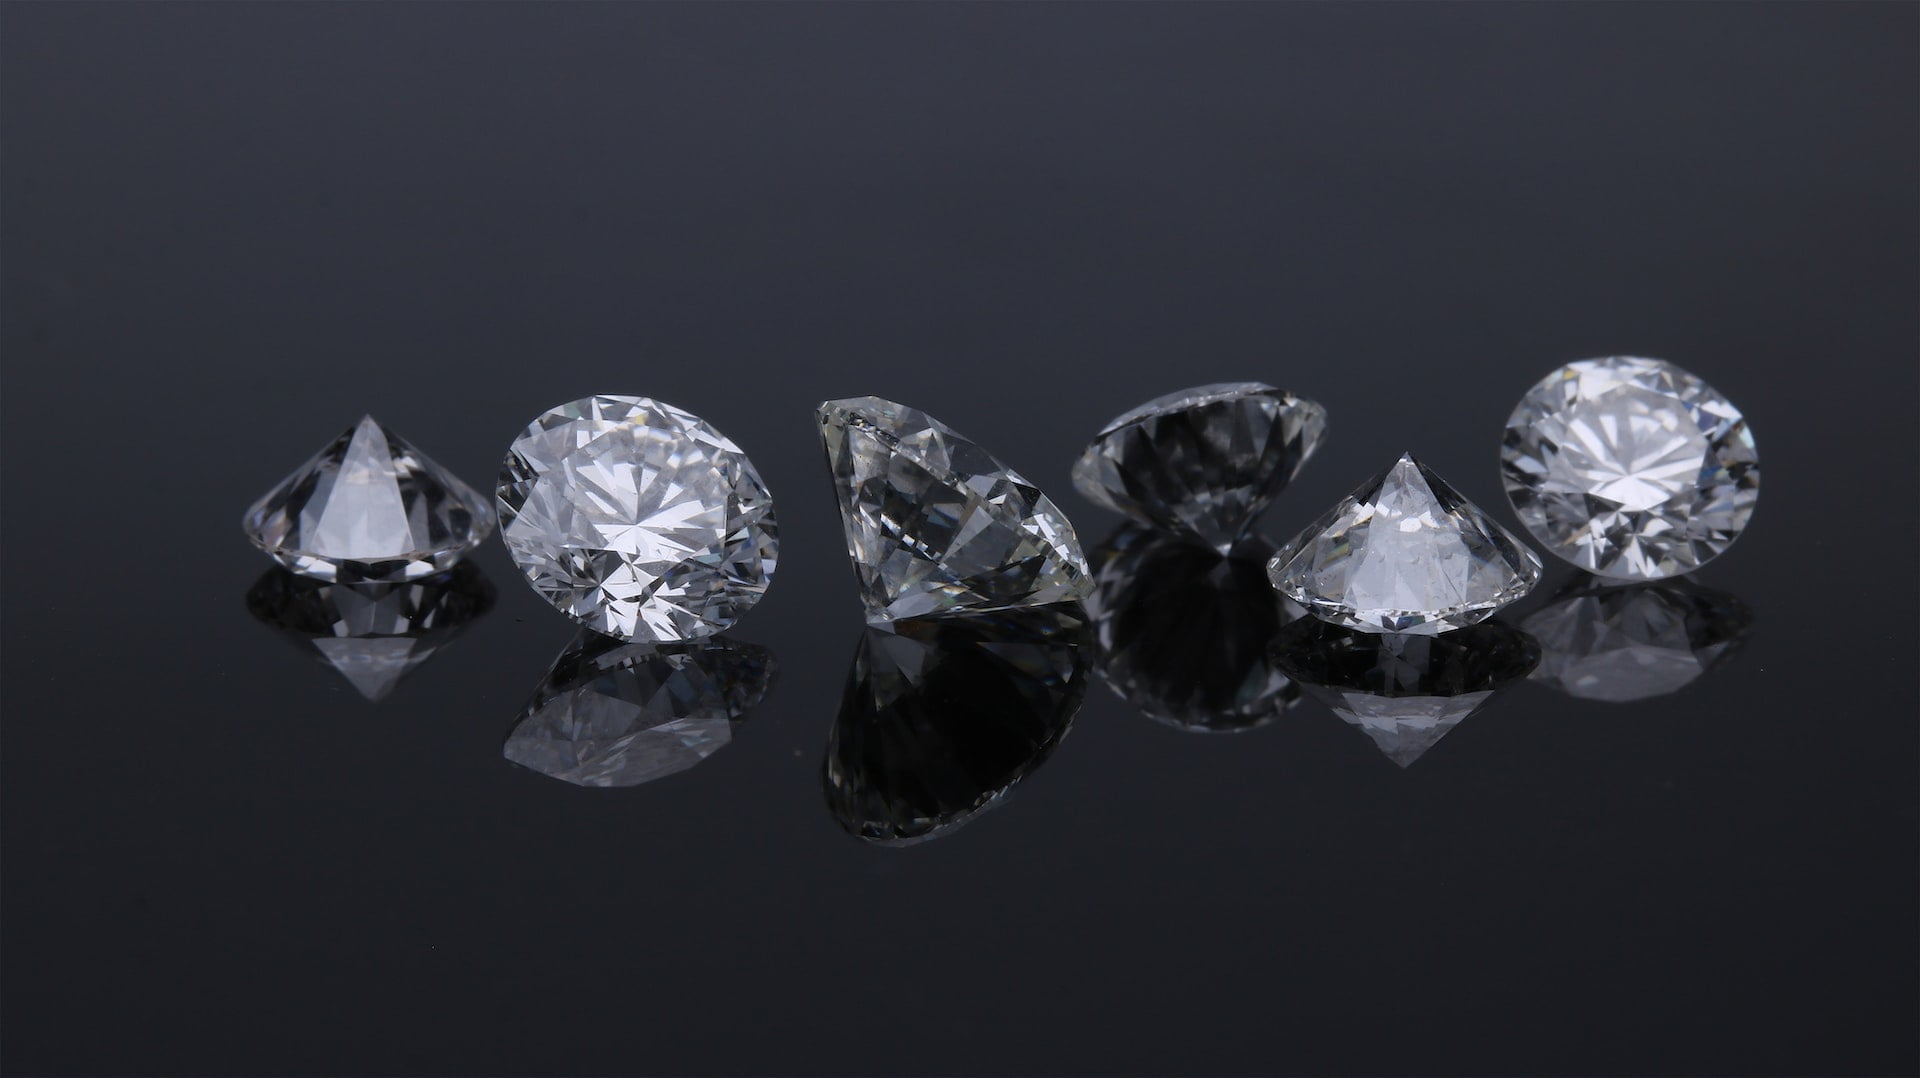 6 "ethical diamonds" on a black background